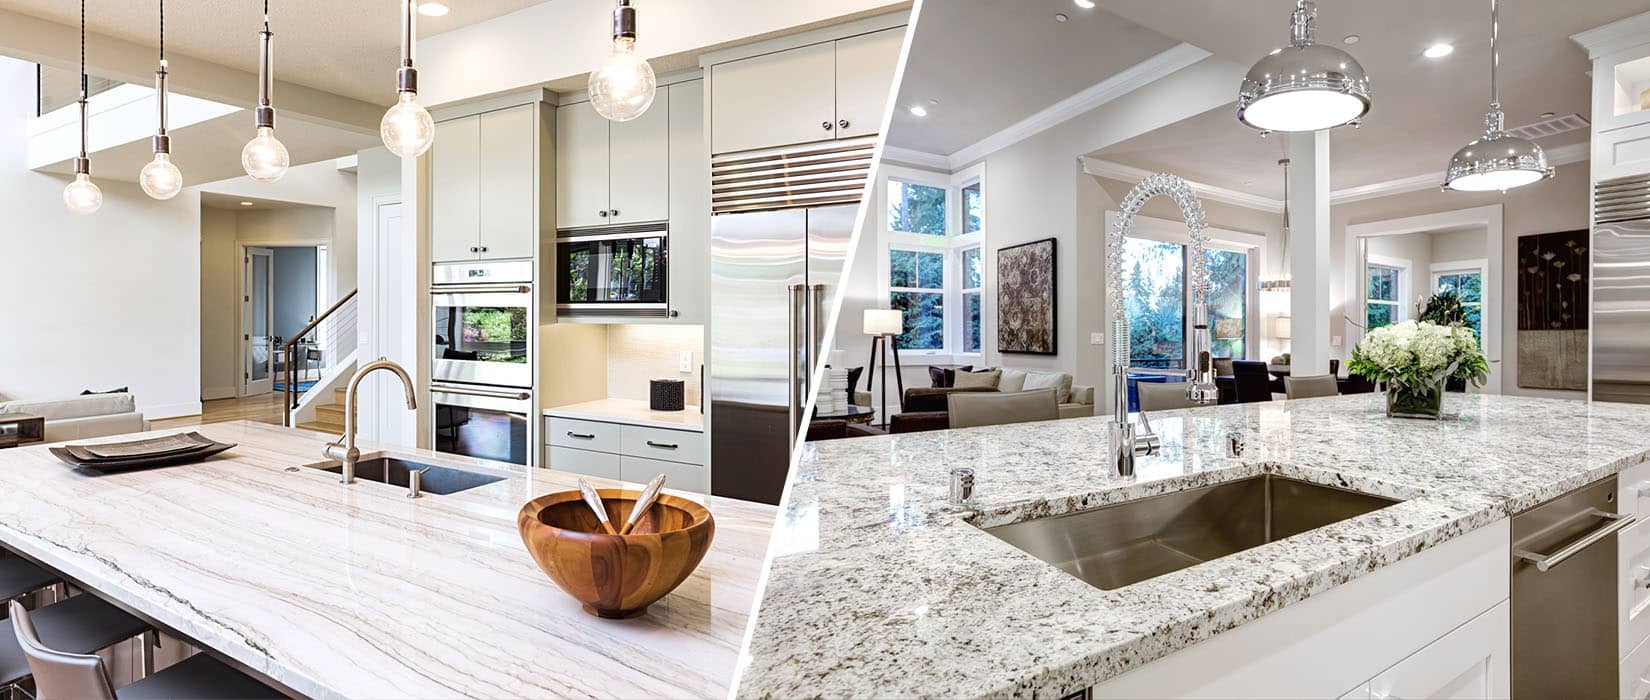 Side-by-side image of kitchens with marble and granite countertops.